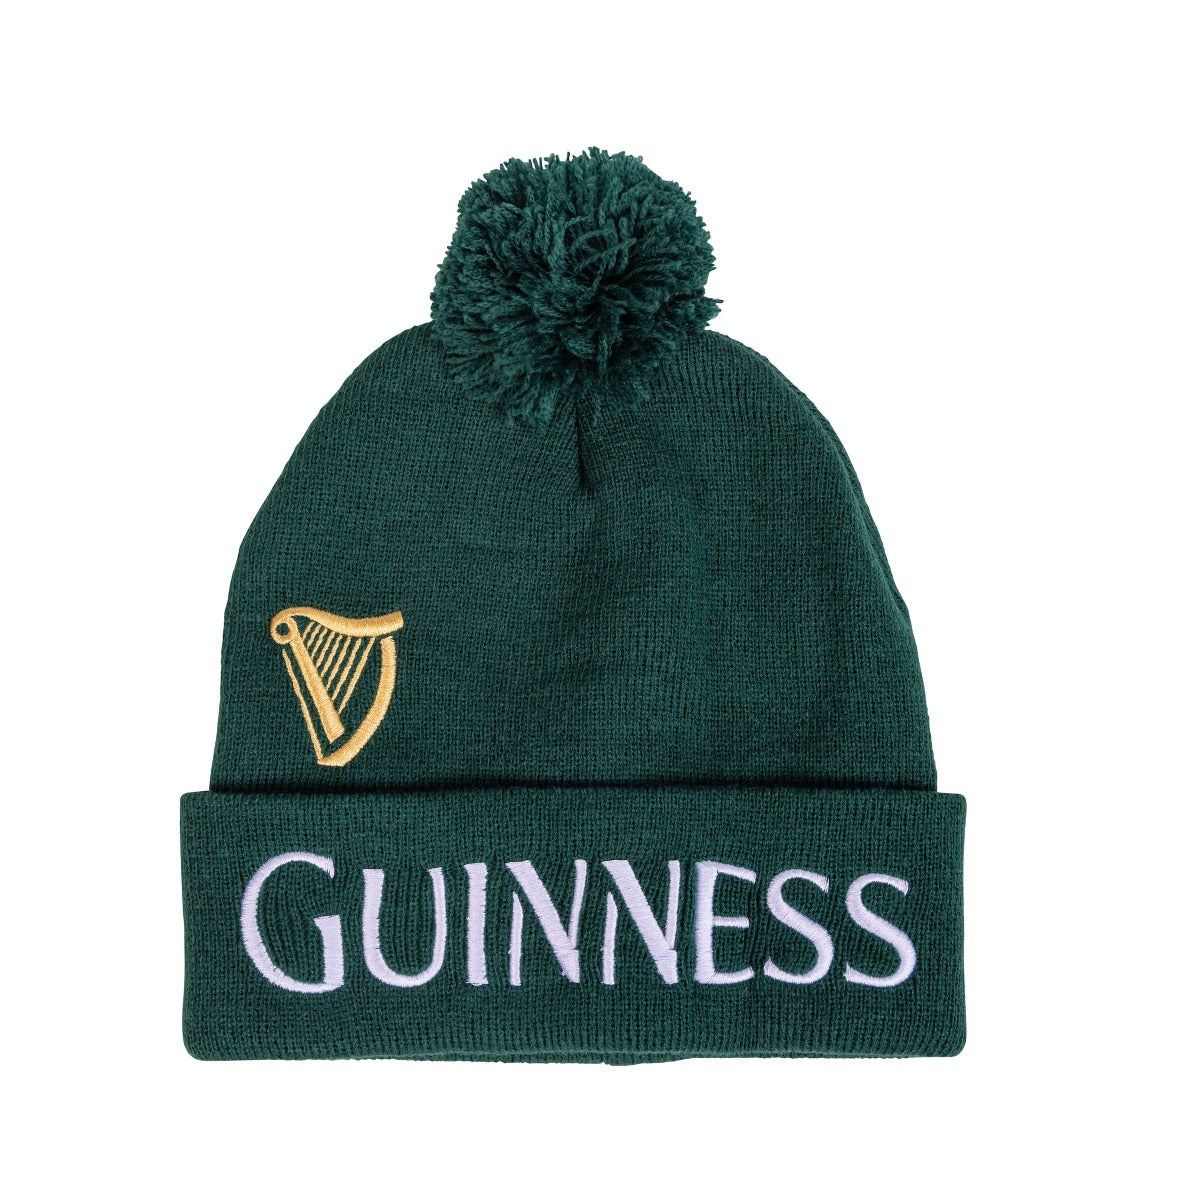 Guinness Knitted Hat